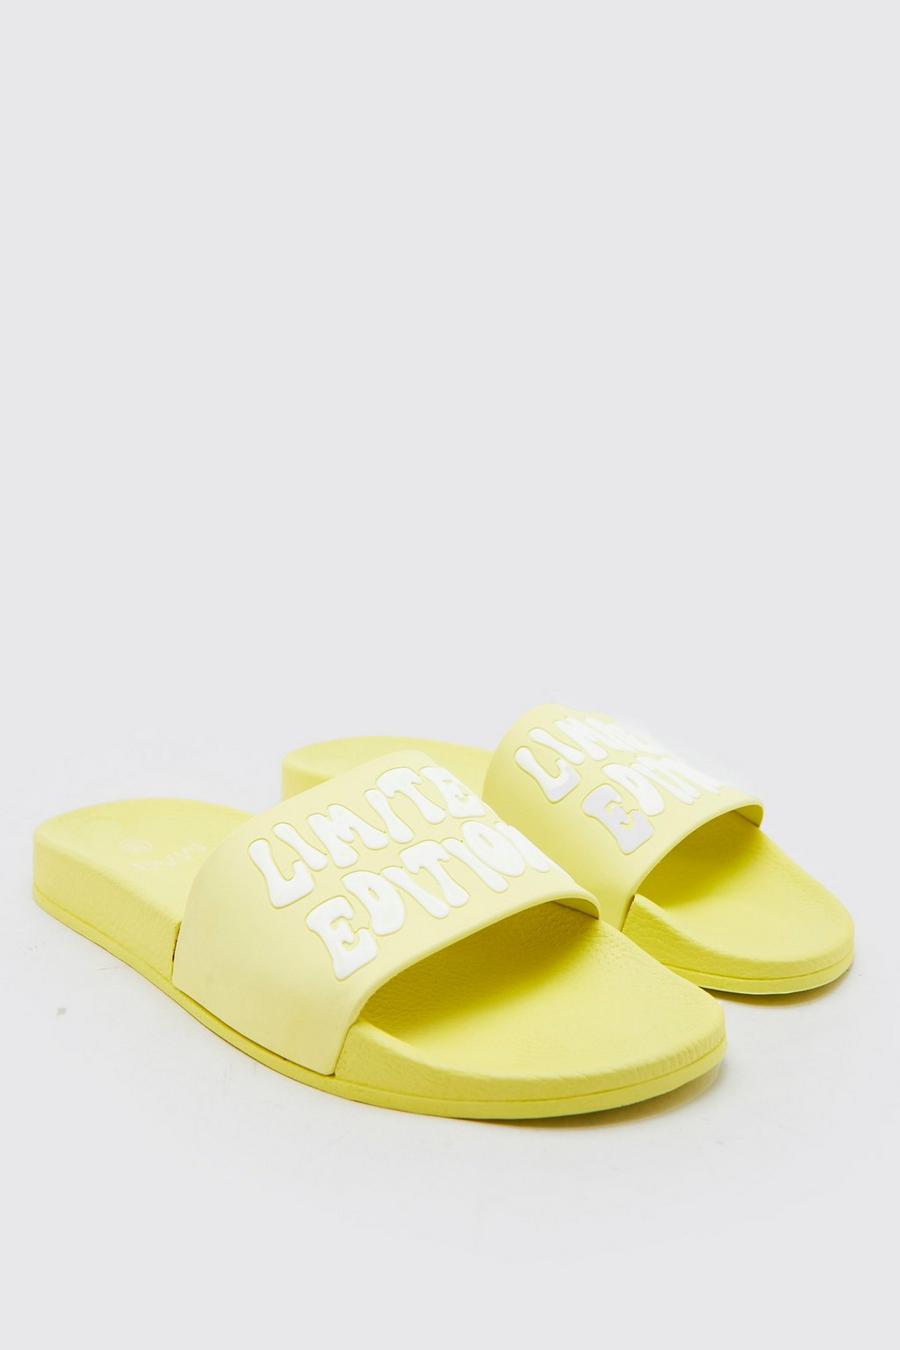 Limited Edition Slides, Lime green